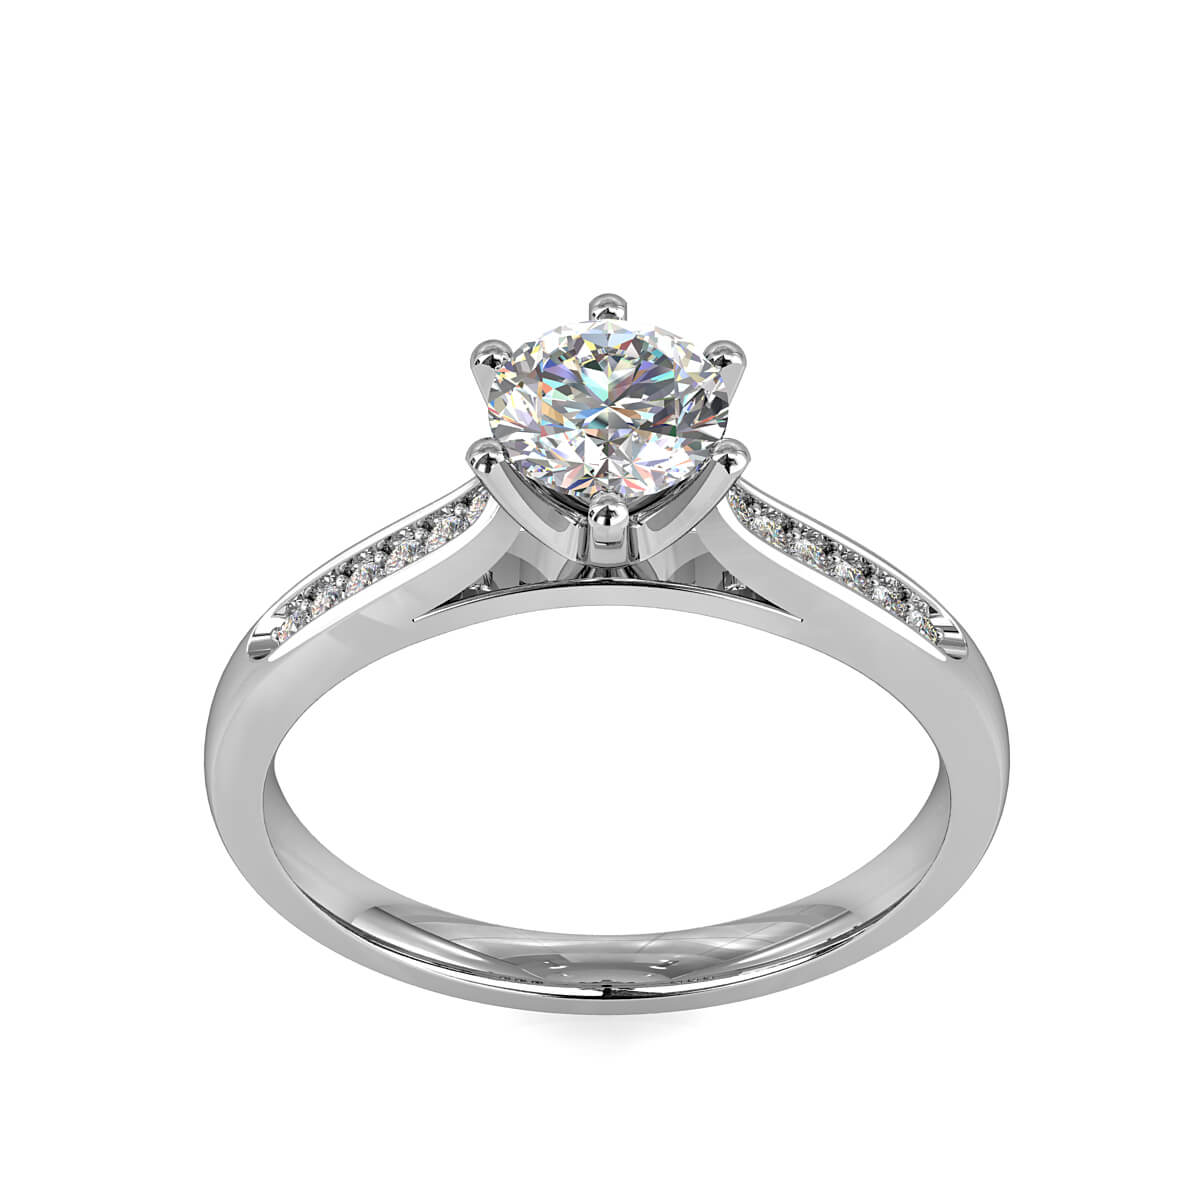 Round Brilliant Cut Solitaire Diamond Engagement Ring, 6 Button Claws Set on a Tapered Bead Set Band with Classic Undersetting.